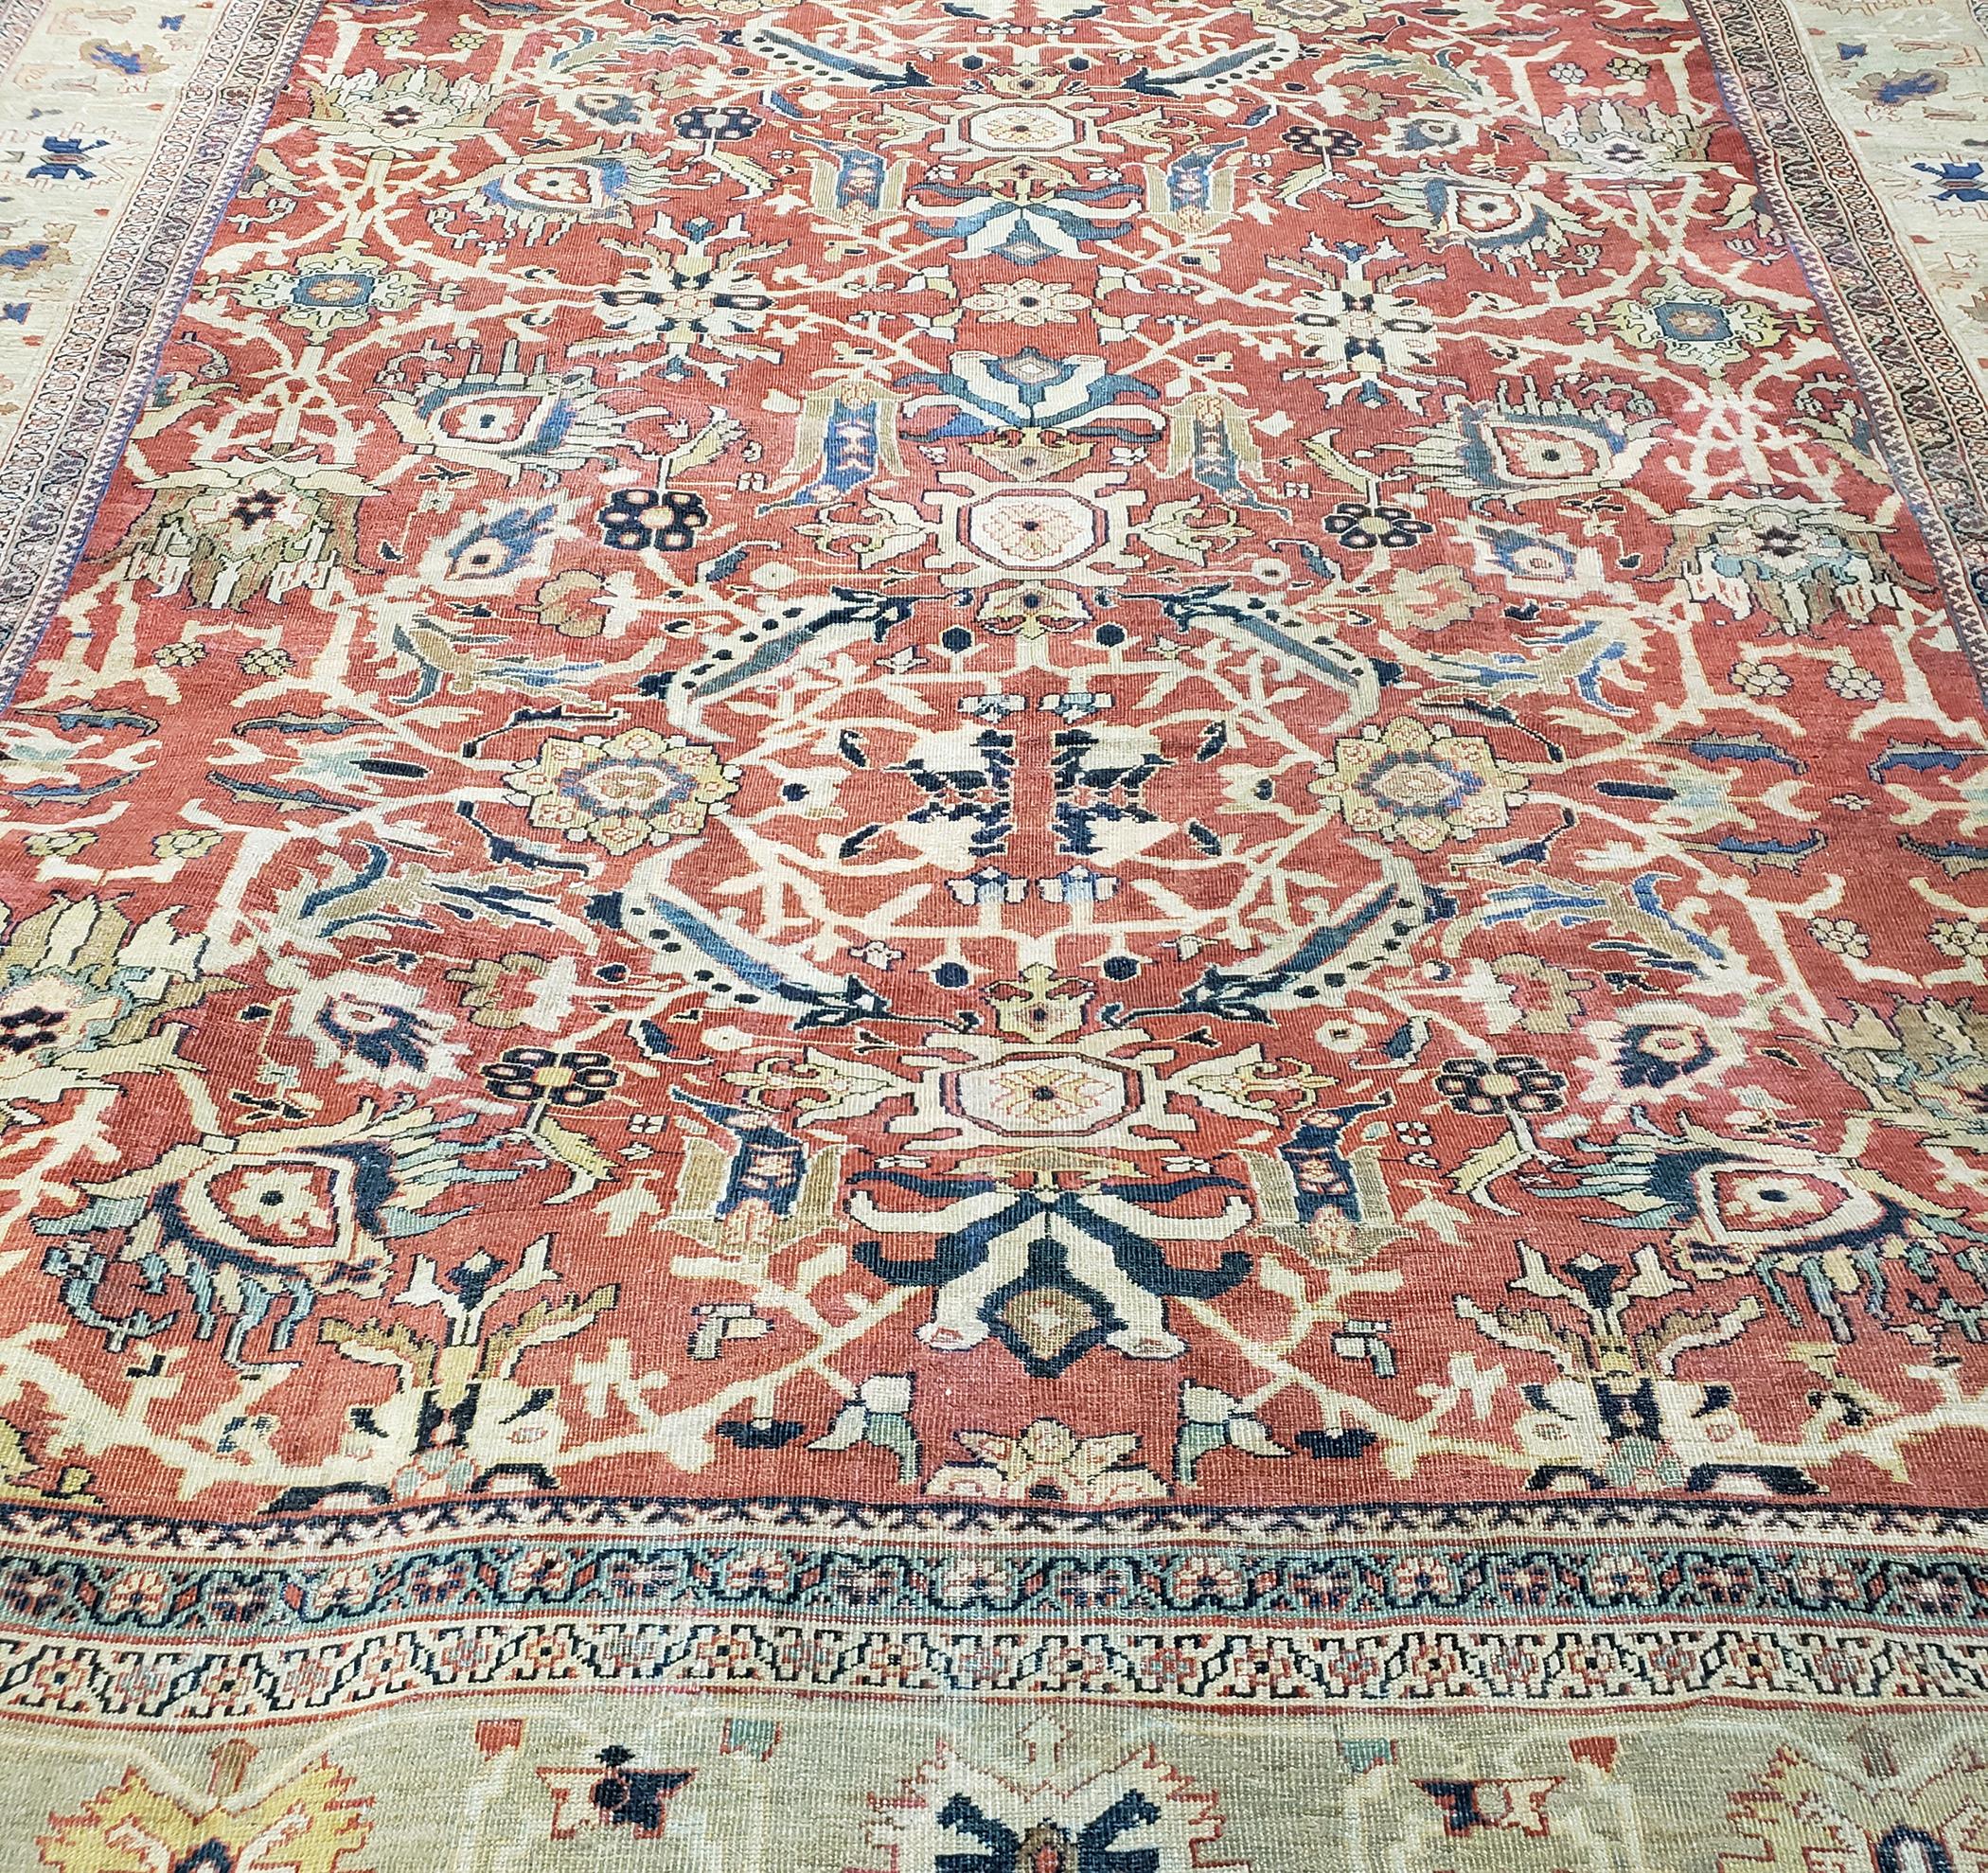 This is an impressive antique Persian Mahal rug in a rich red background and allover pattern amid a decorative border.
Custom recreations available in any size and color. Rug measures 12'10